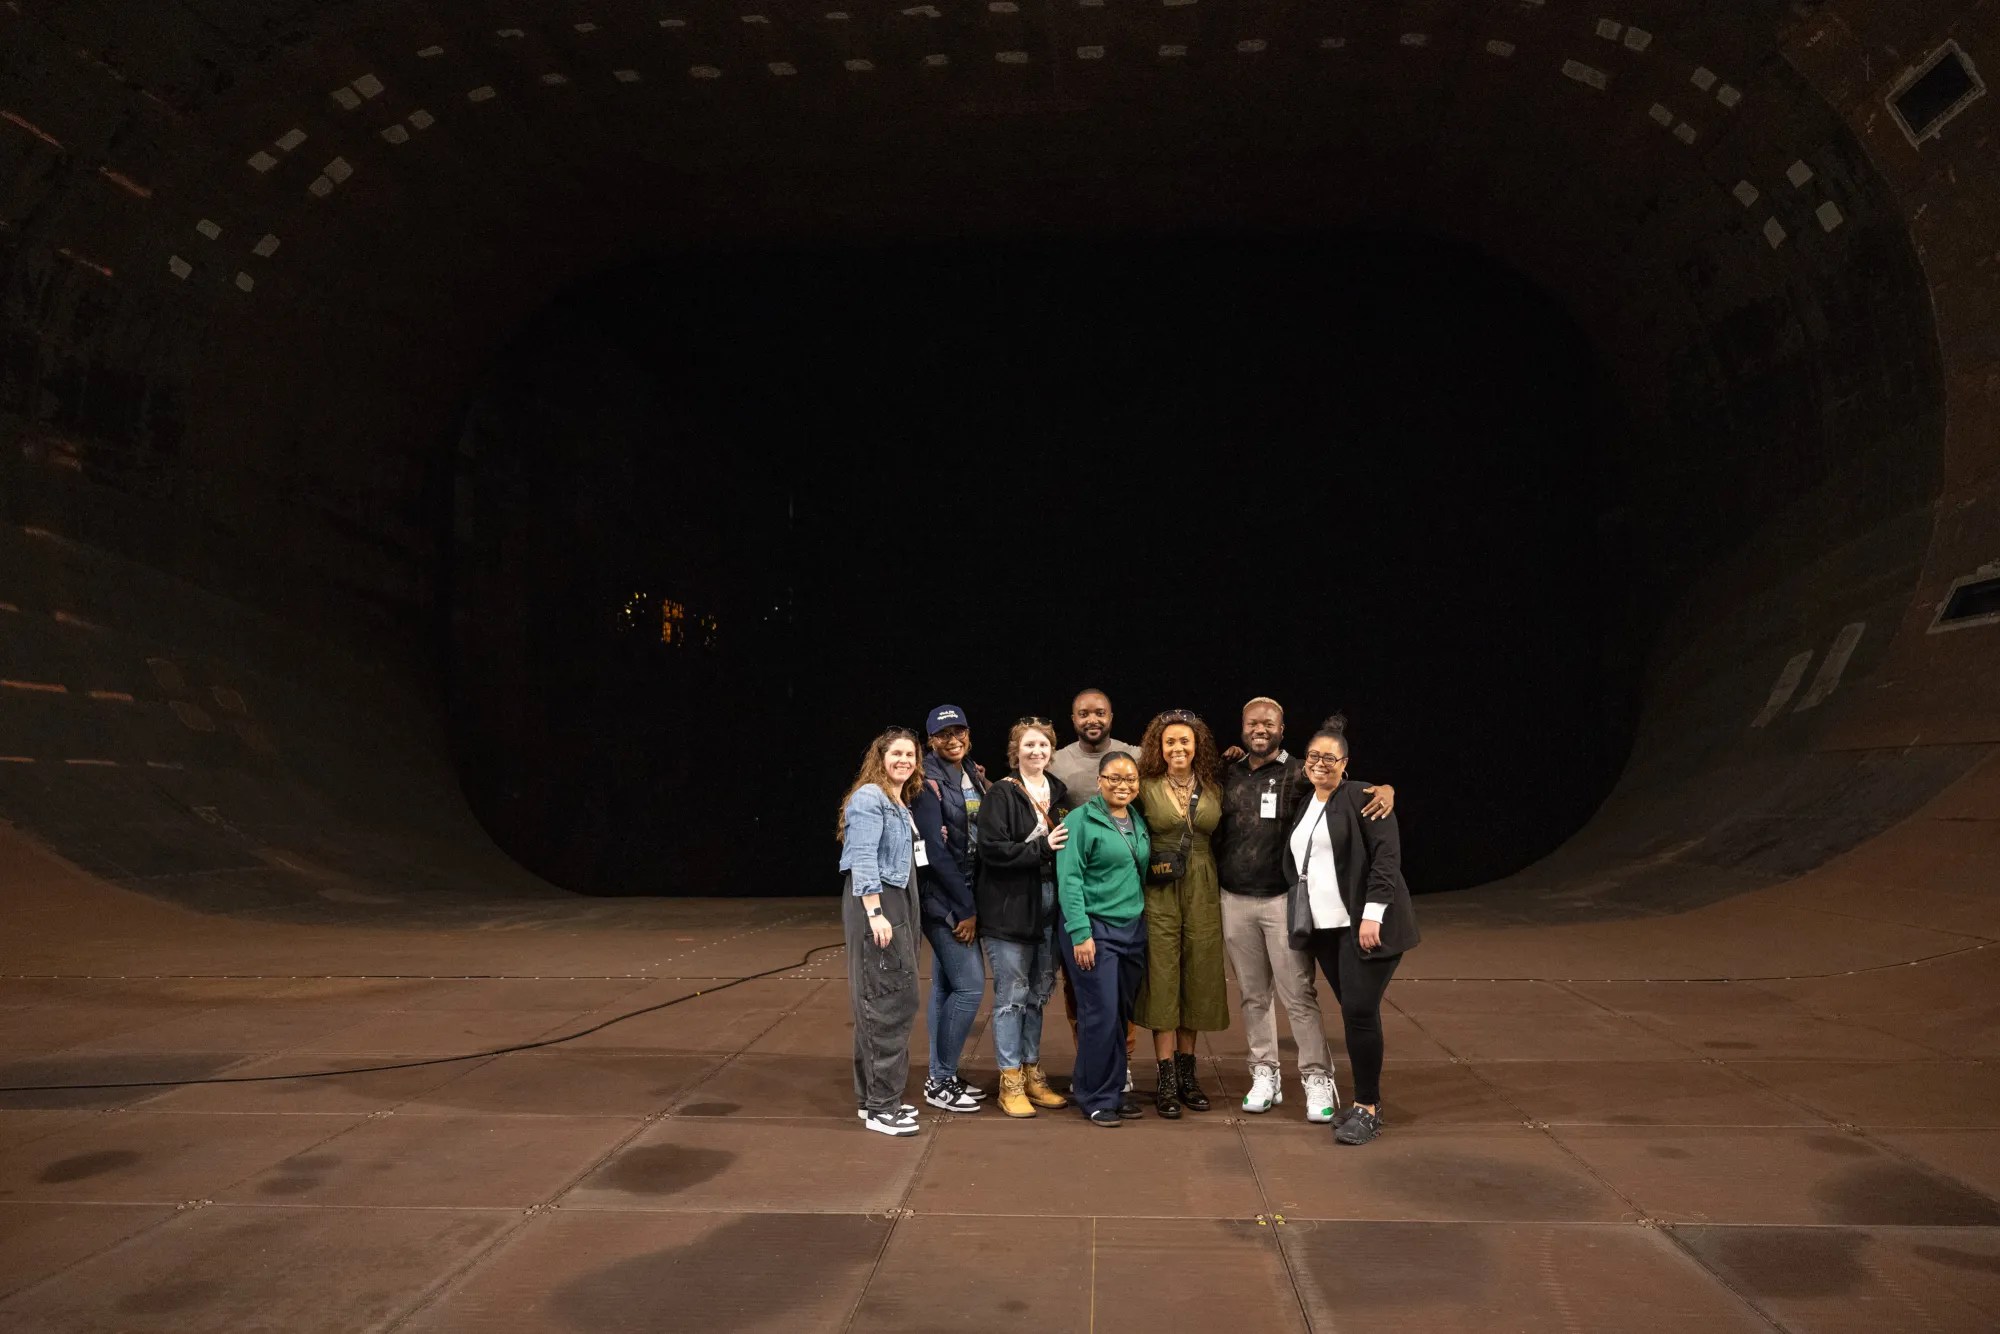 Members of the cast and crew of “The Wiz” pose inside the National Full-Scale Aerodynamic Complex 40 by 80 foot wind tunnel at NASA’s Ames Research Center in Silicon Valley.